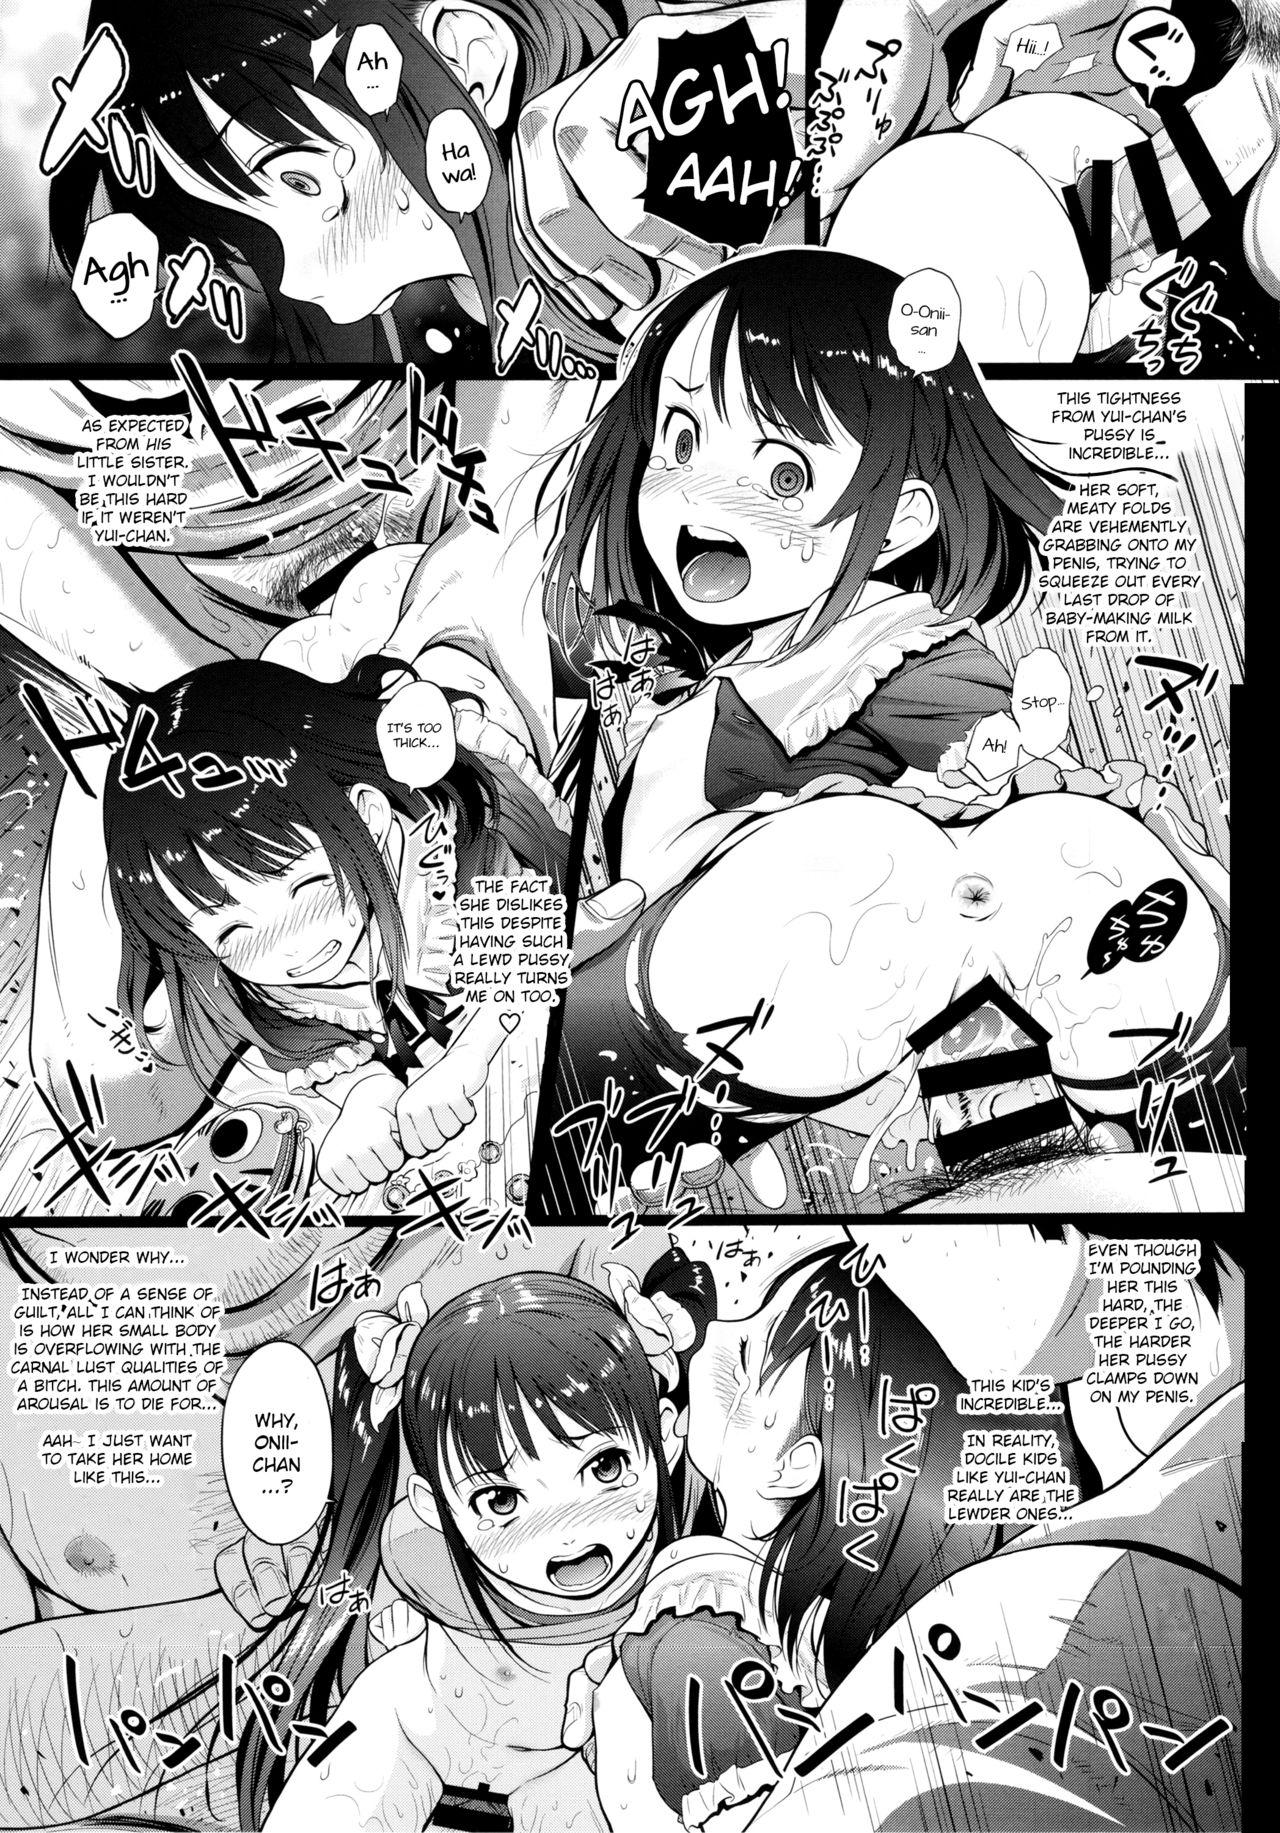 Girls Getting Fucked Imouto Koukan | Little Sister Exchange - Original Finger - Page 6